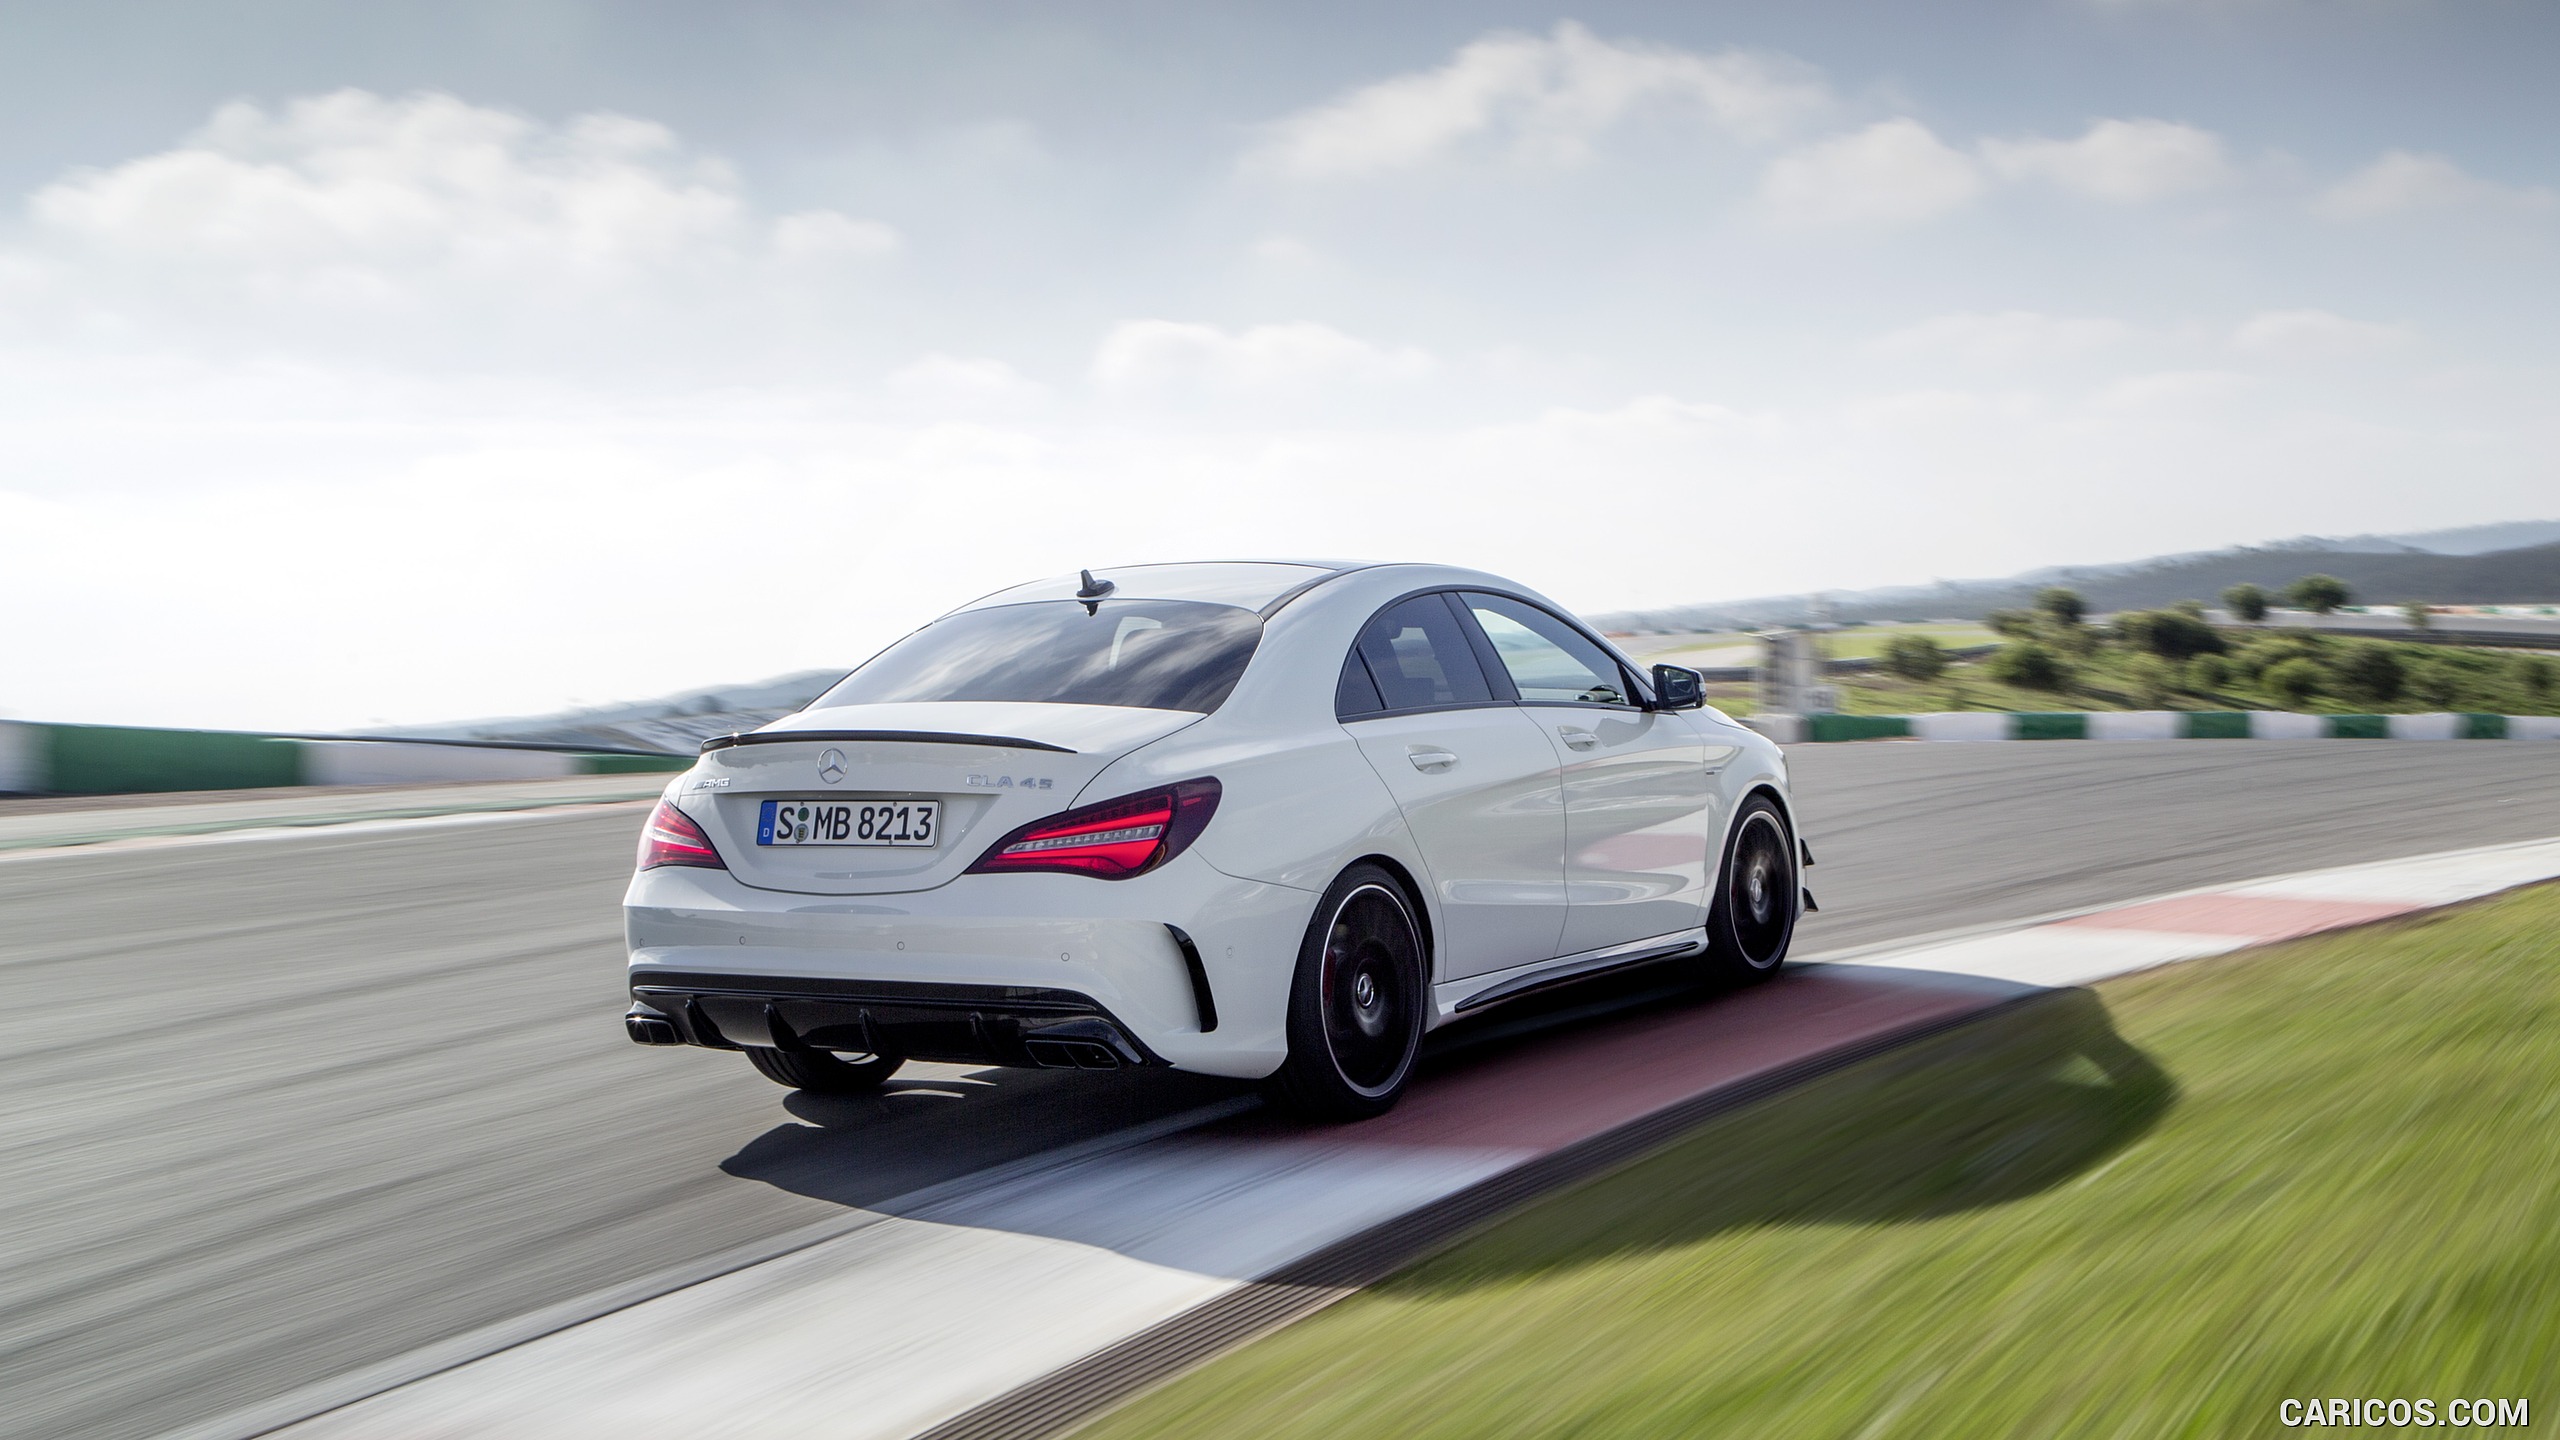 2017 Mercedes-AMG CLA 45 Coupé with Aerodynamics Package (Chassis: C117, Color: Diamond White) - Rear, #3 of 11